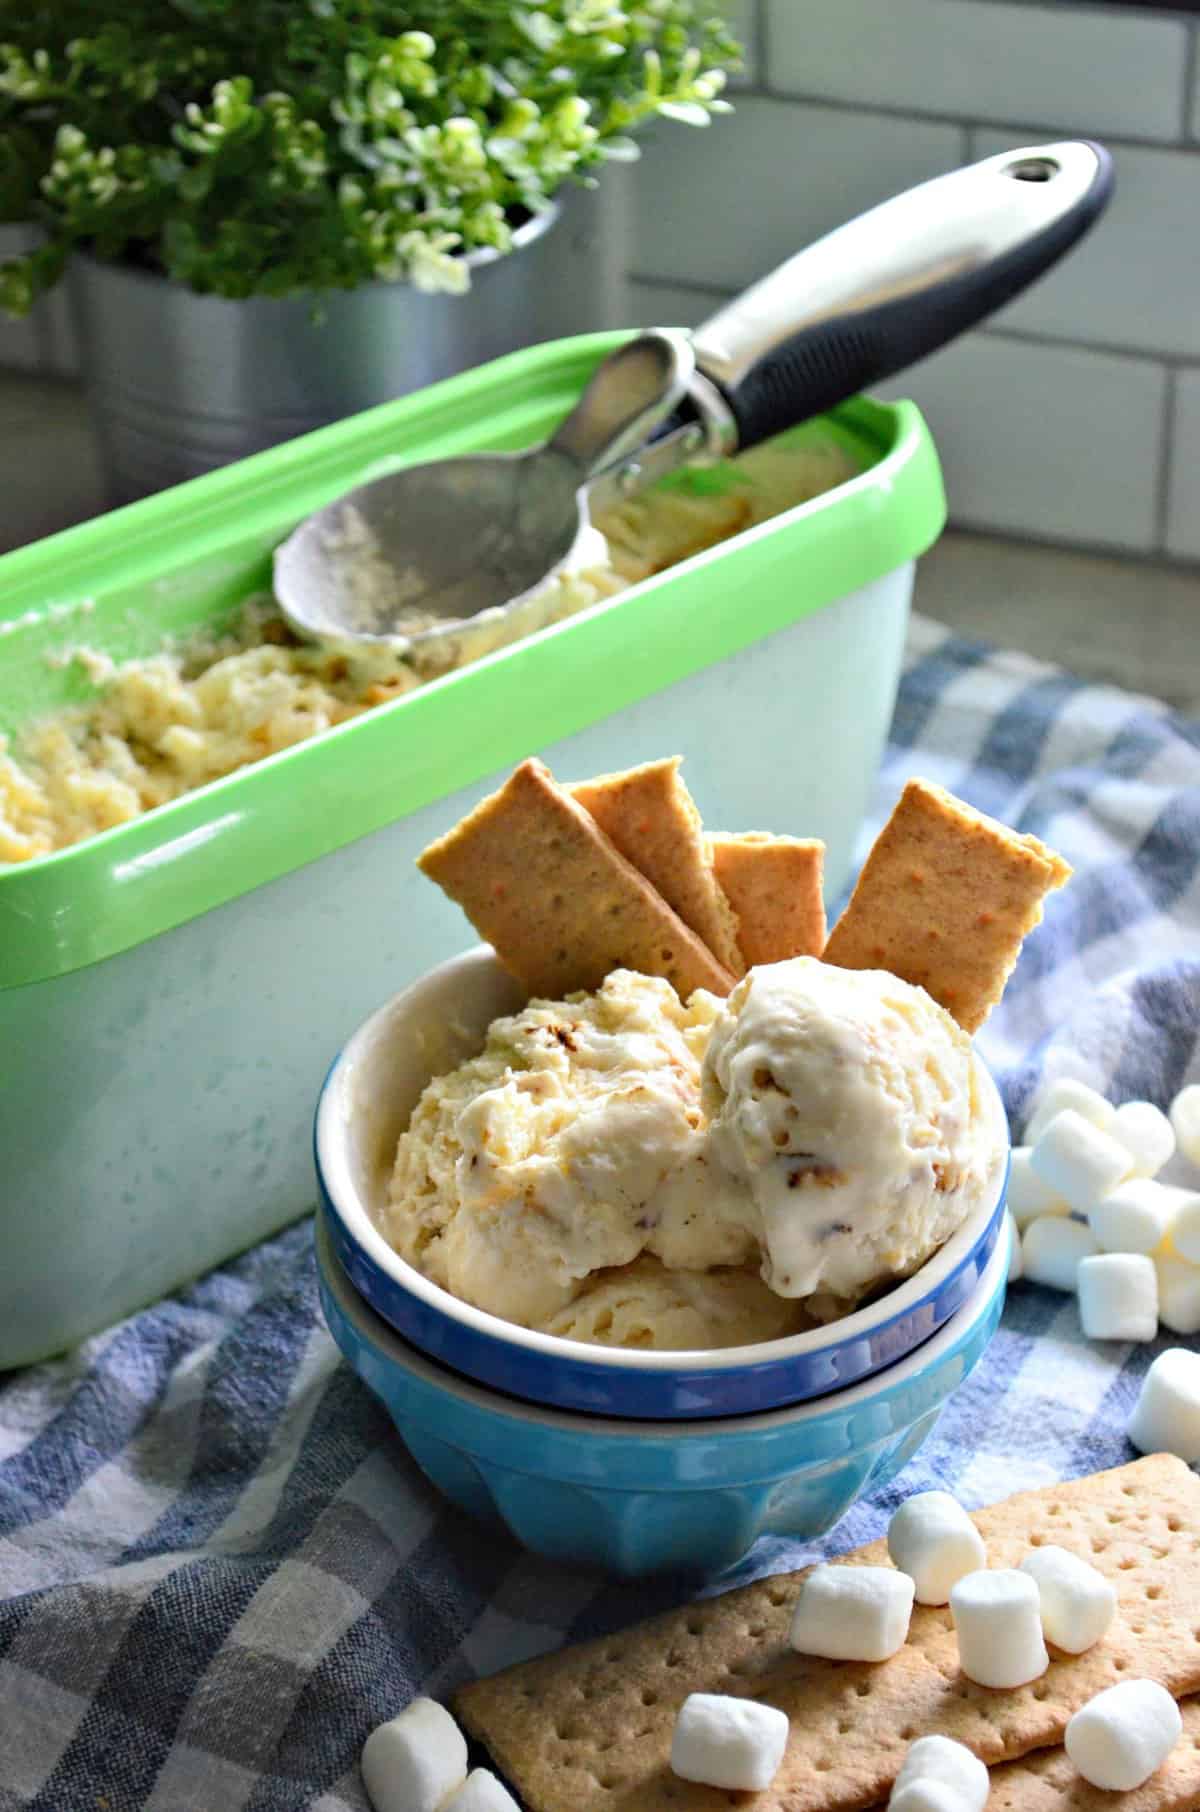 bowl of creamy colored chunky ice cream with graham crackers next to container of more ice cream.